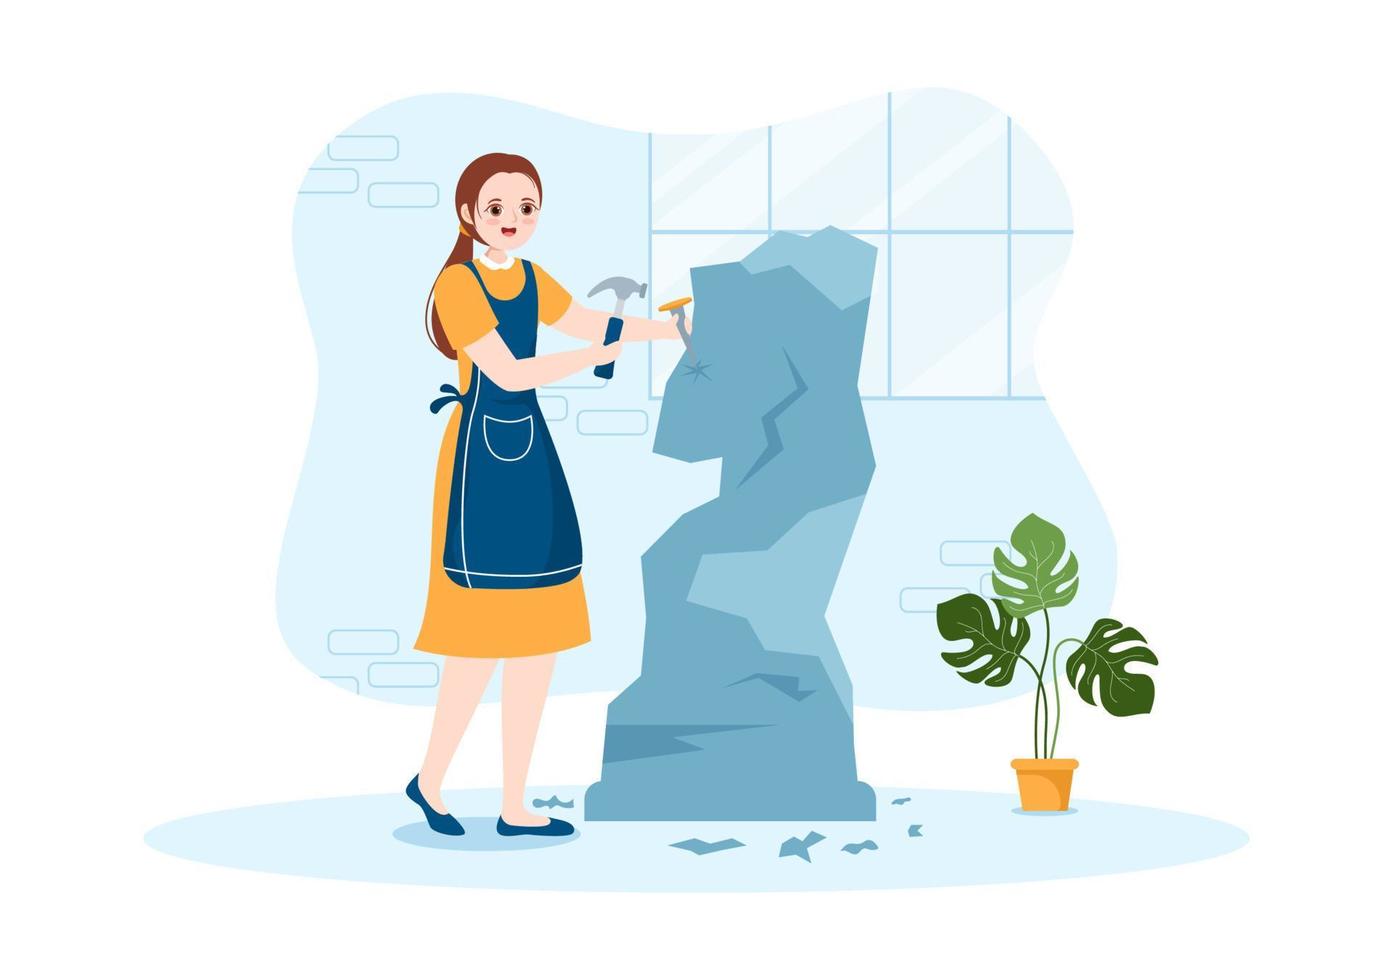 a Sculptor is Carving Sculpture to Form a Work and Will be on Display in the Museum on Flat Cartoon Hand Drawn Templates Illustration vector